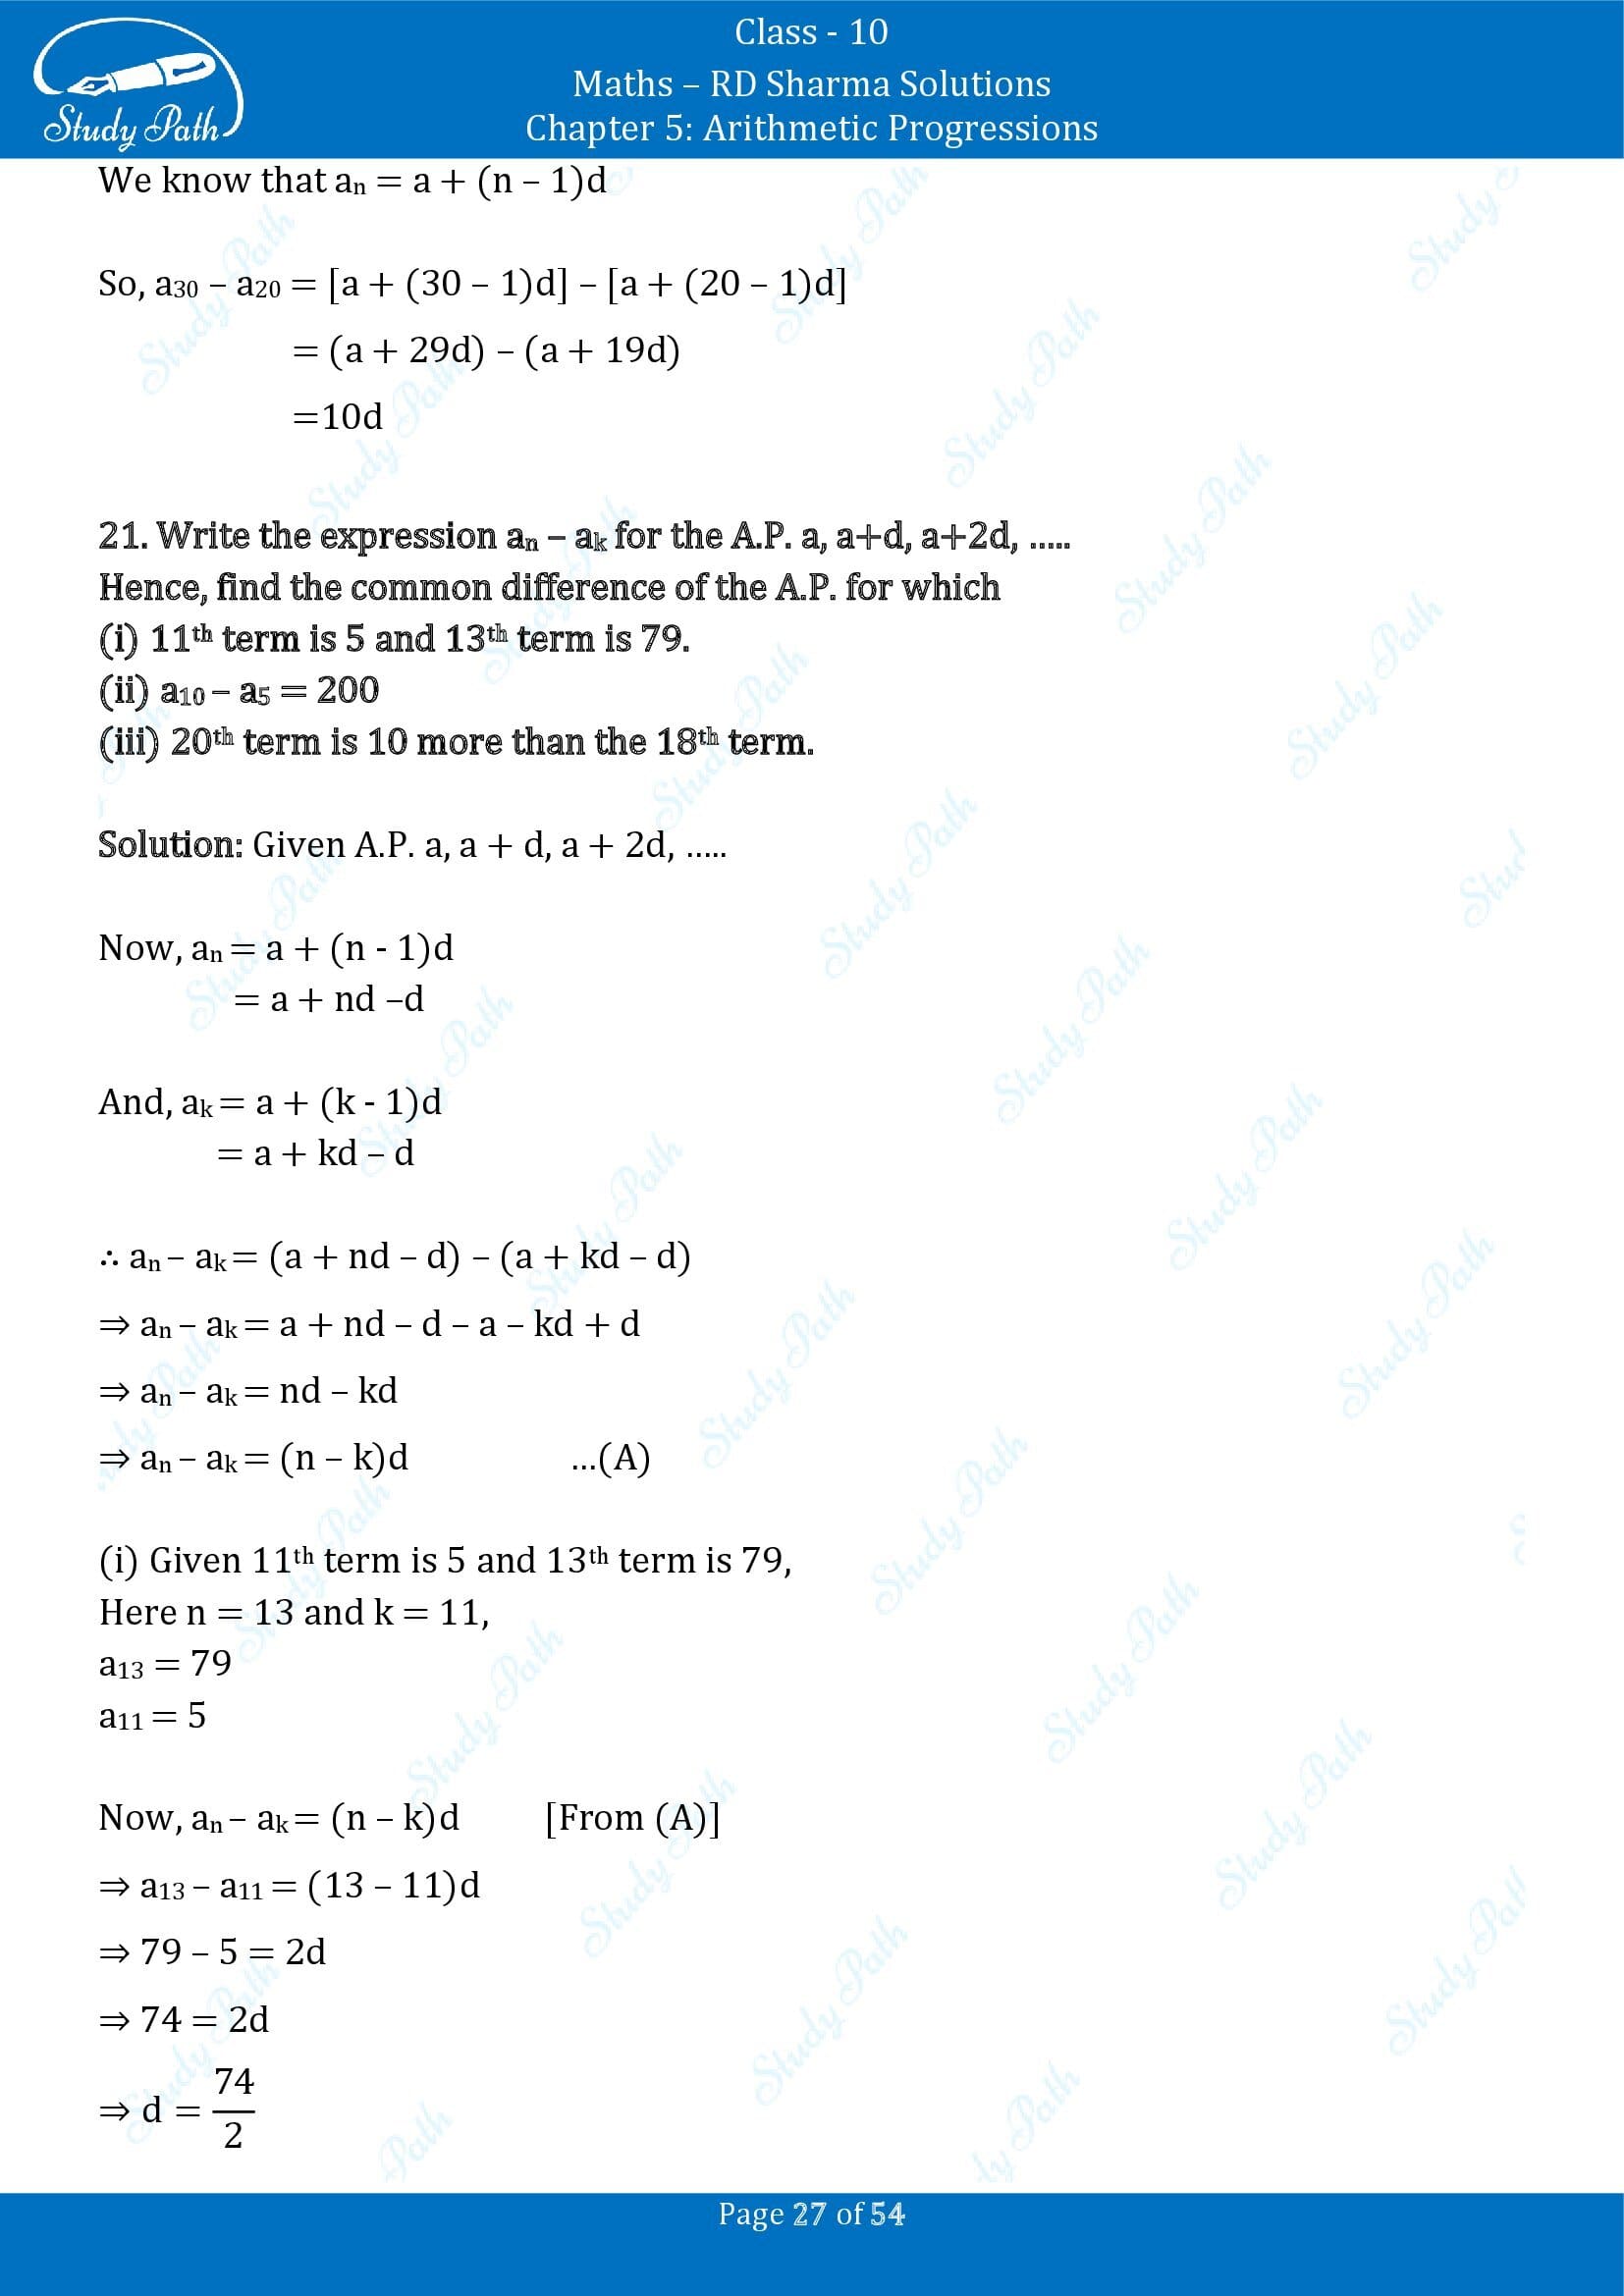 RD Sharma Solutions Class 10 Chapter 5 Arithmetic Progressions Exercise 5.4 00027